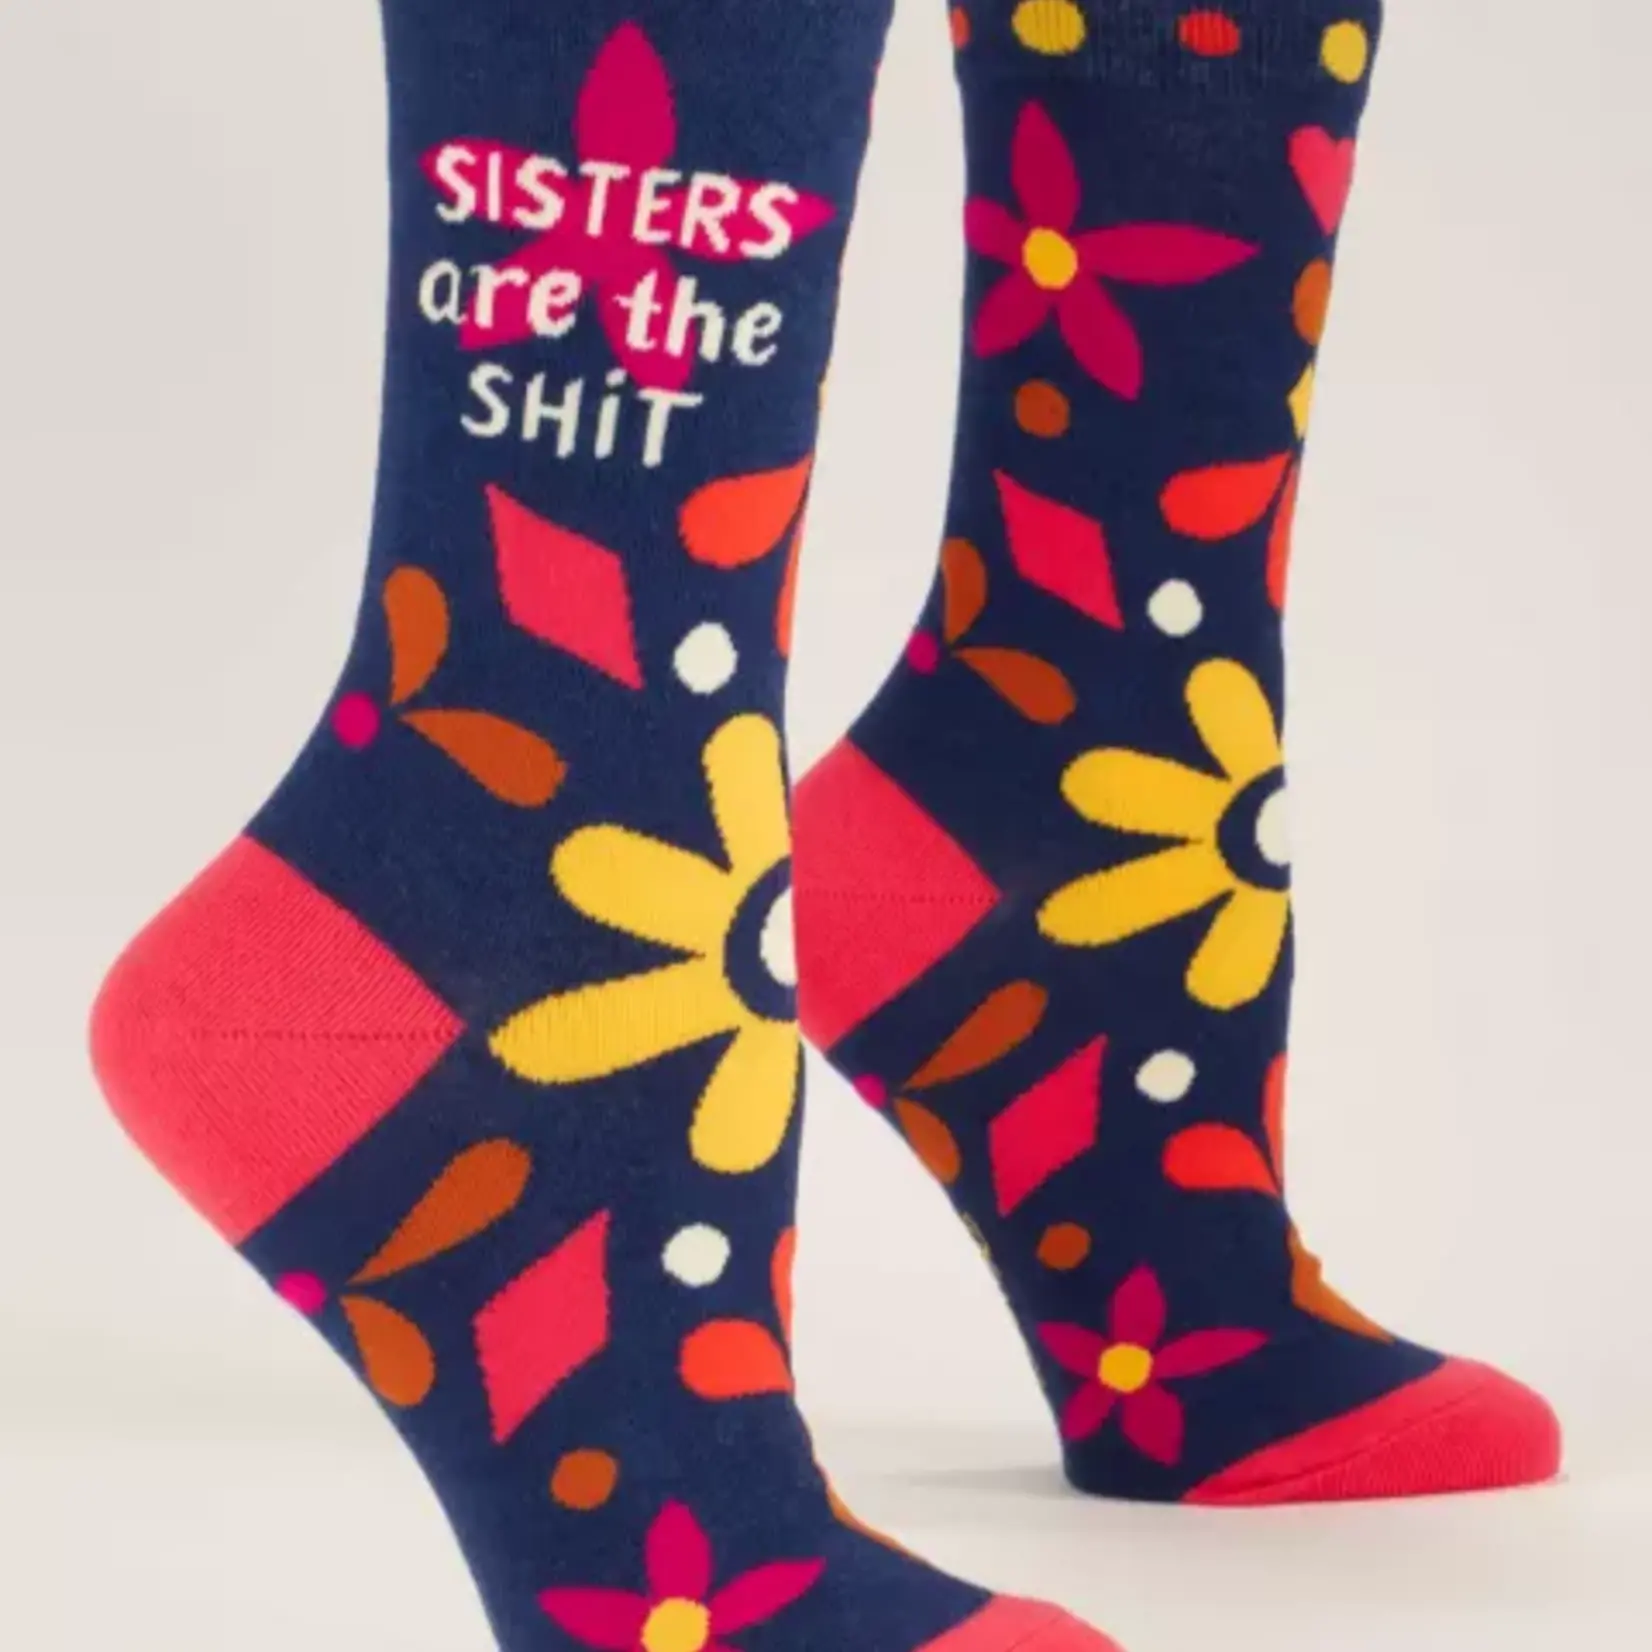 Blue Q Blue Q - Crew Socks - Sisters are the shit